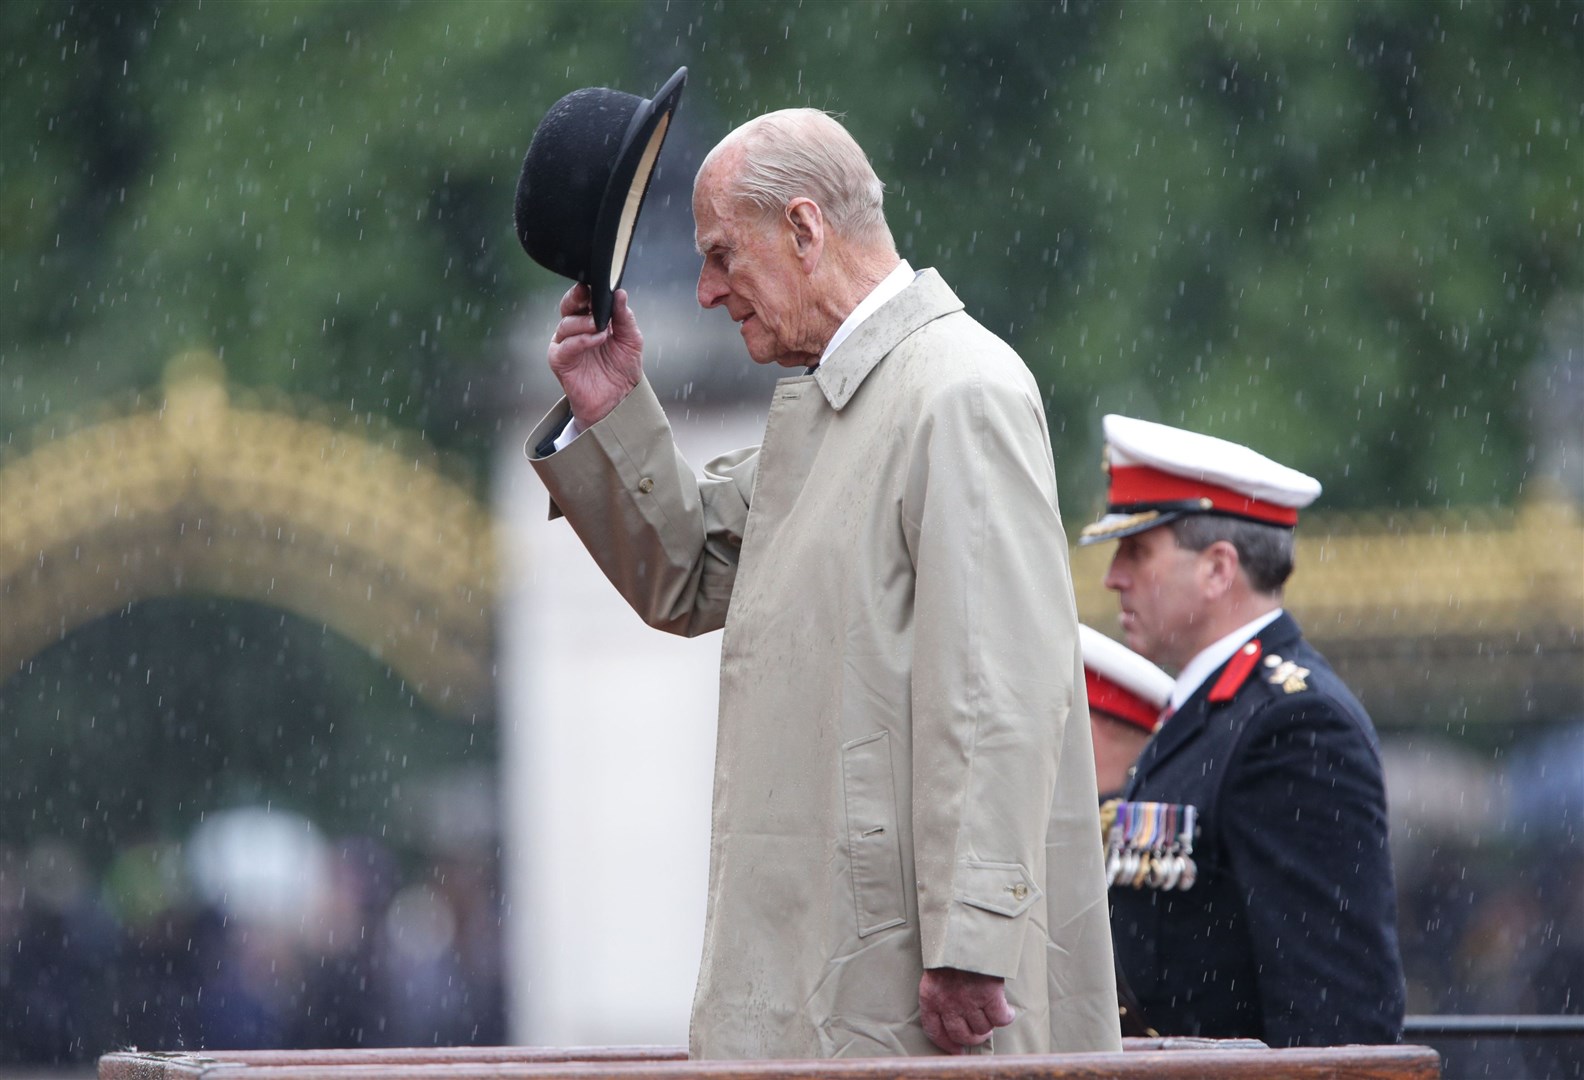 The duke joked the squaddies should be ‘locked up’ for what they had put themselves through for charity (Yui Mok/PA)